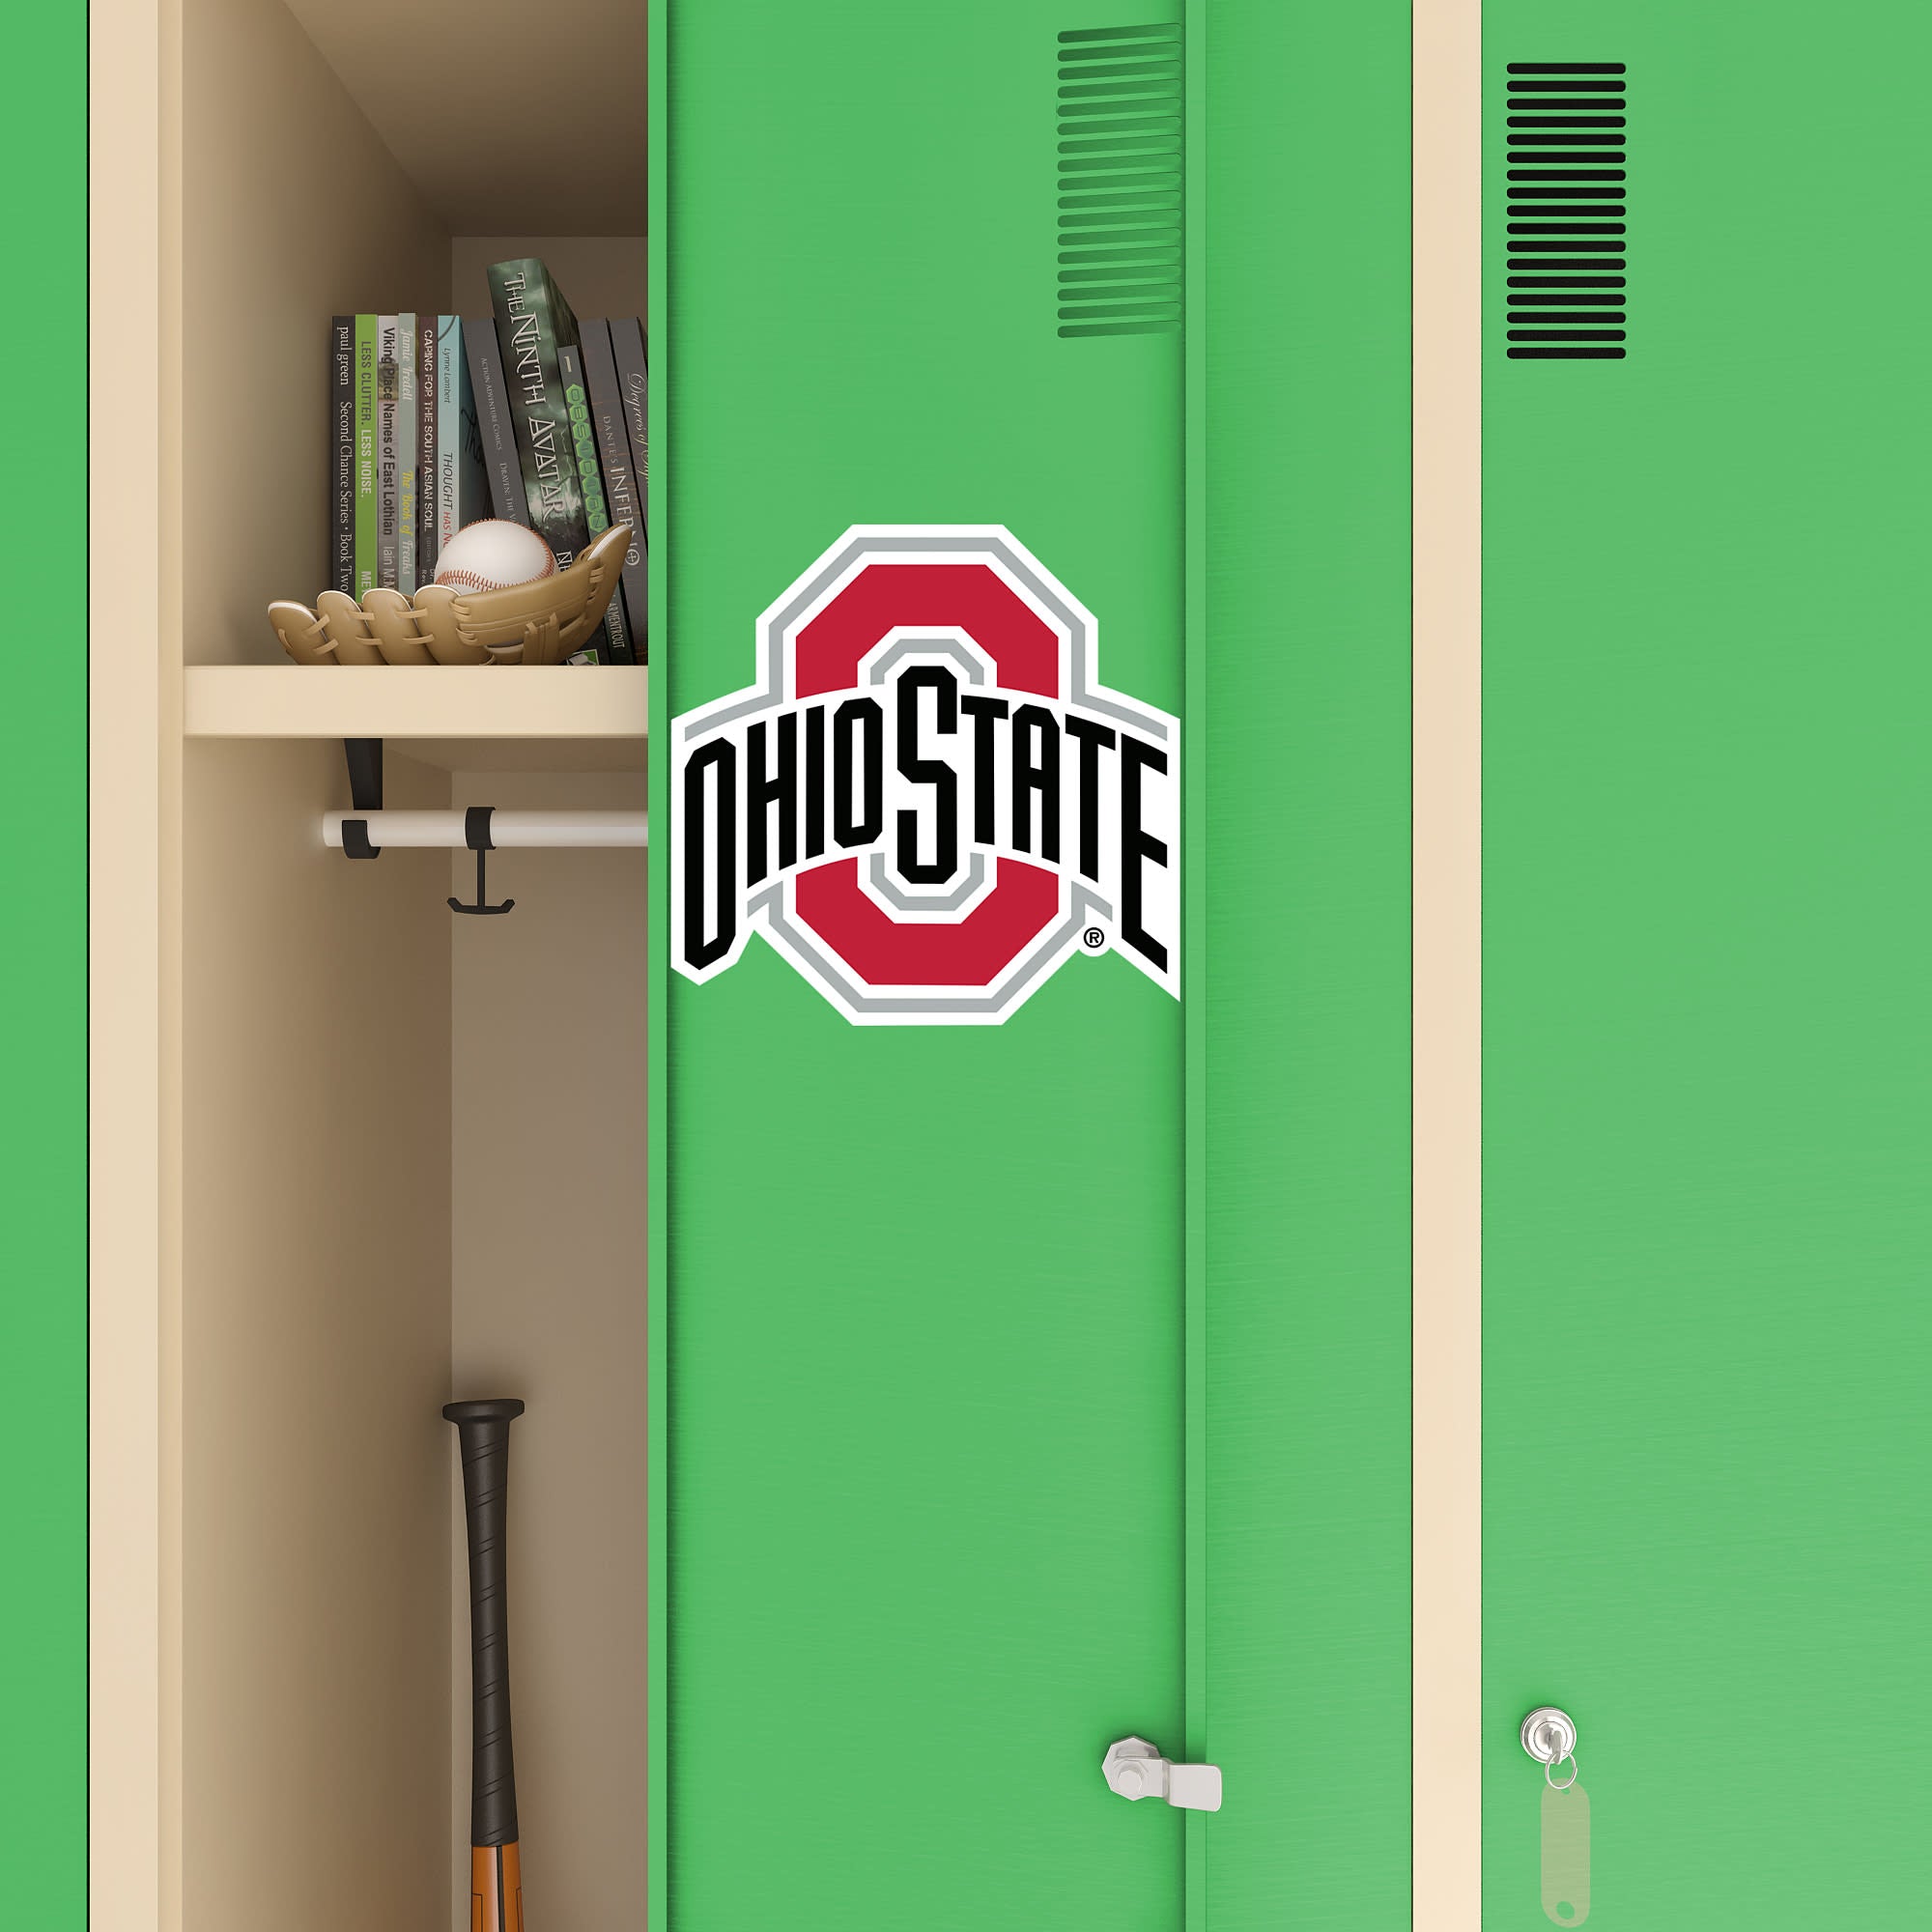 Ohio State Buckeyes: Logo - Officially Licensed Removable Wall Decal 11.5"W x 11.0"H by Fathead | Vinyl